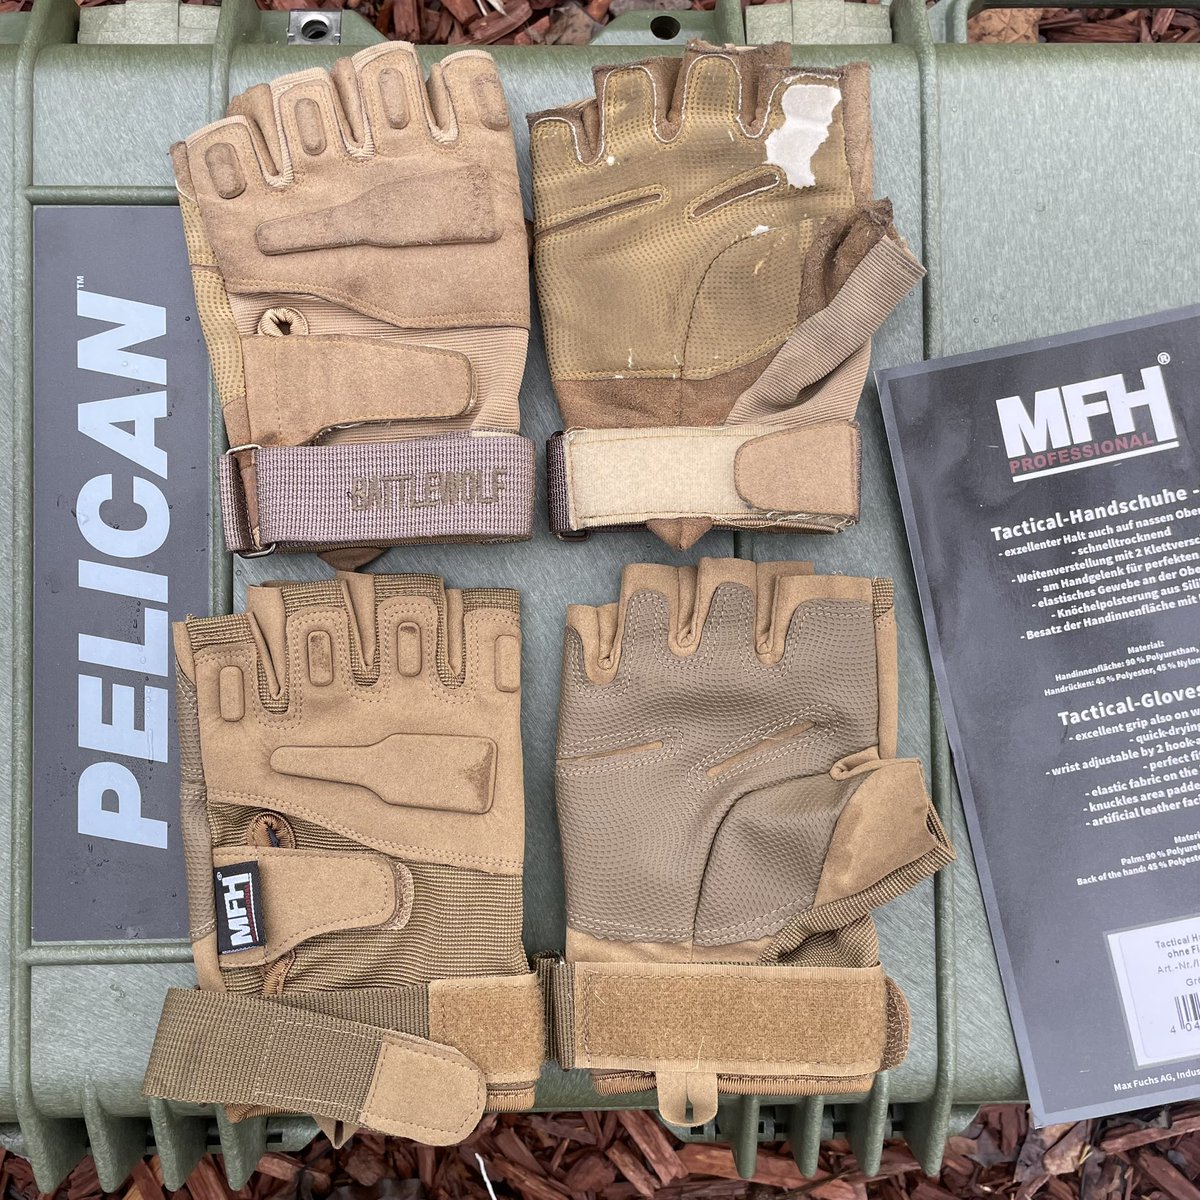 New gloves by MFH from Military1st in the UK

These are far nicer than my knock-off of the BLACKHAWK S.O.L.A.G. Half finger gloves

The color also is a bit darker, and better matches my LBX Tactical Armatus II plate carrier

#MFH #TacticalGloves #CaptainPrice #CaptainPriceCosplay